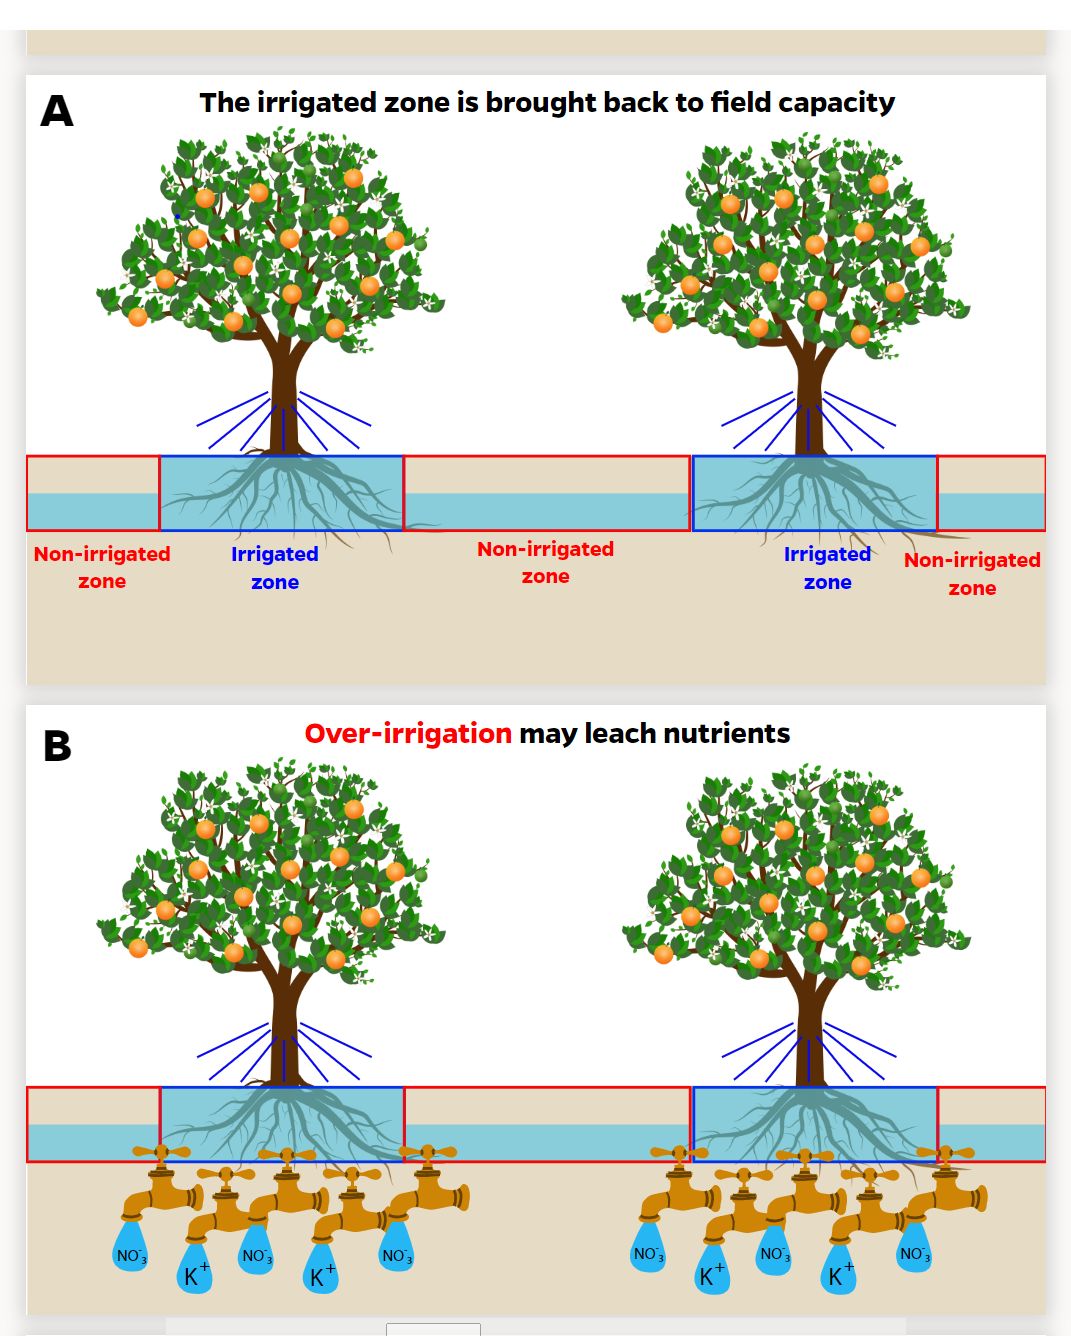 (A) The citrus grove after irrigation returns the wetted zone to field capacity. Note that the nonirrigated zone contains very little available water (top). (B) Excessive irrigation leaches mobile nutrients like nitrate or potassium (bottom).